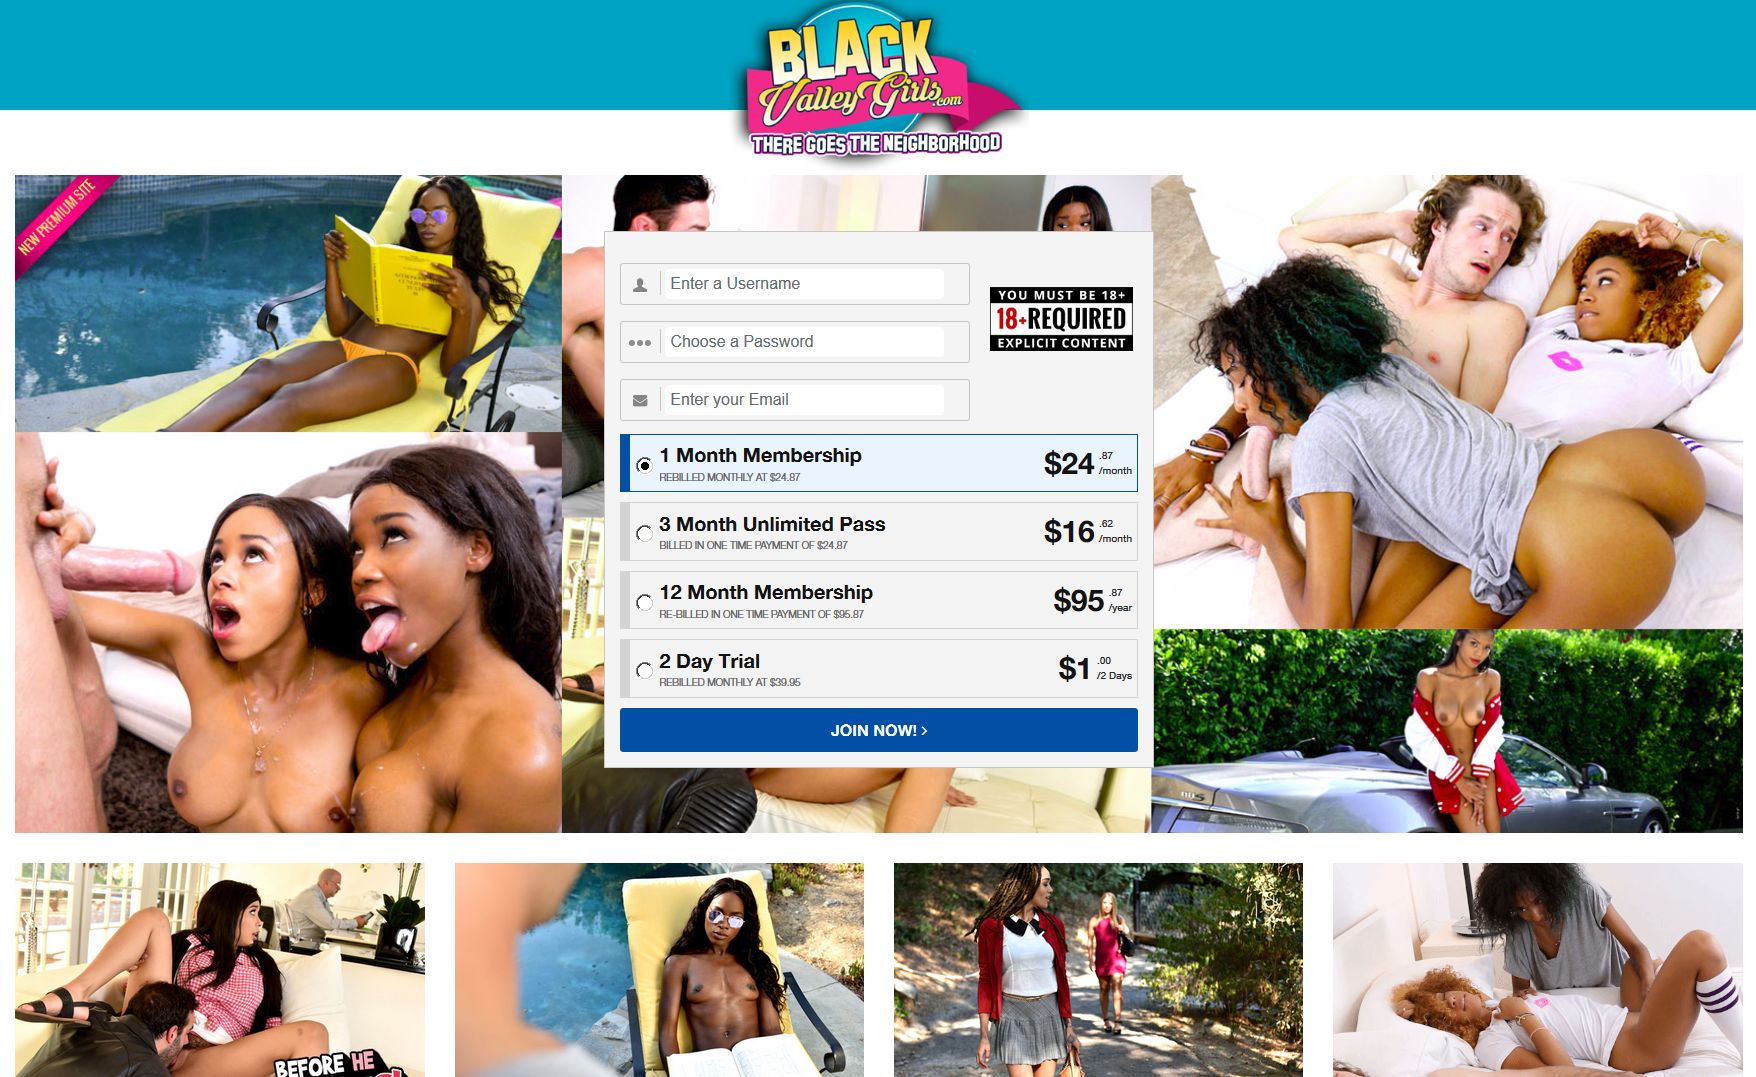 unlimited tested free passwords for blackvalleygirls stolen by Bray from Newport News